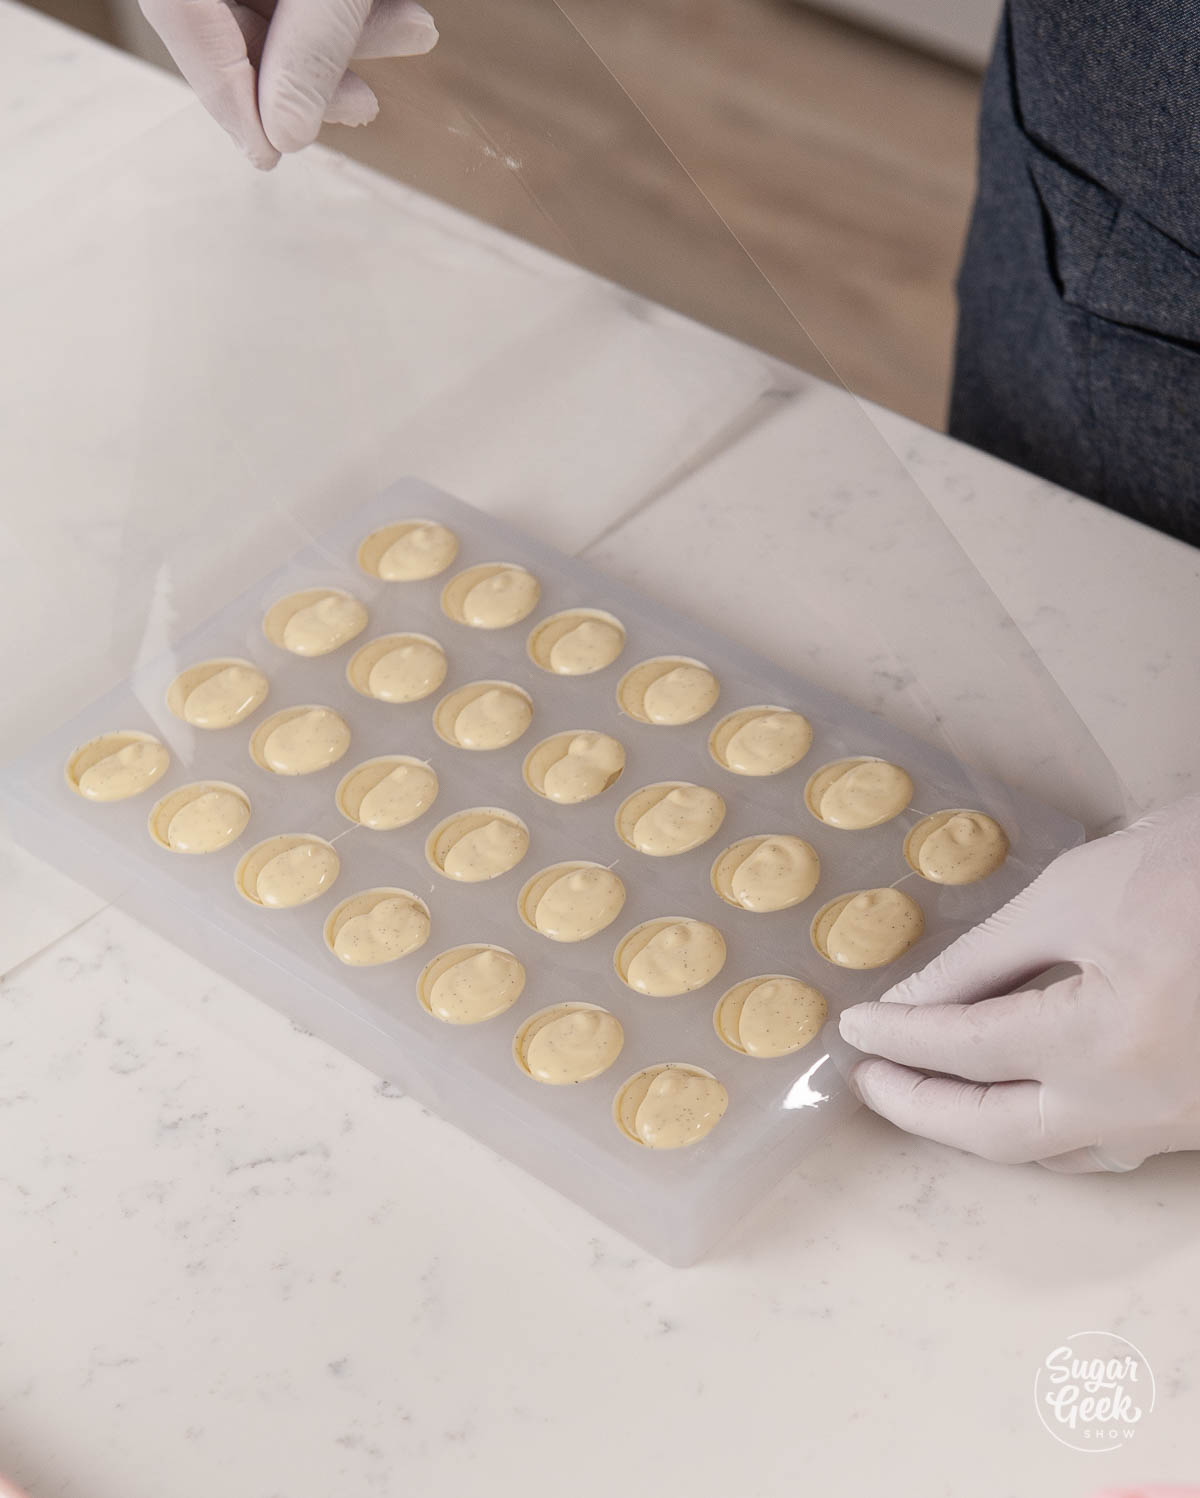 placing acetate on the back of the bonbon mold